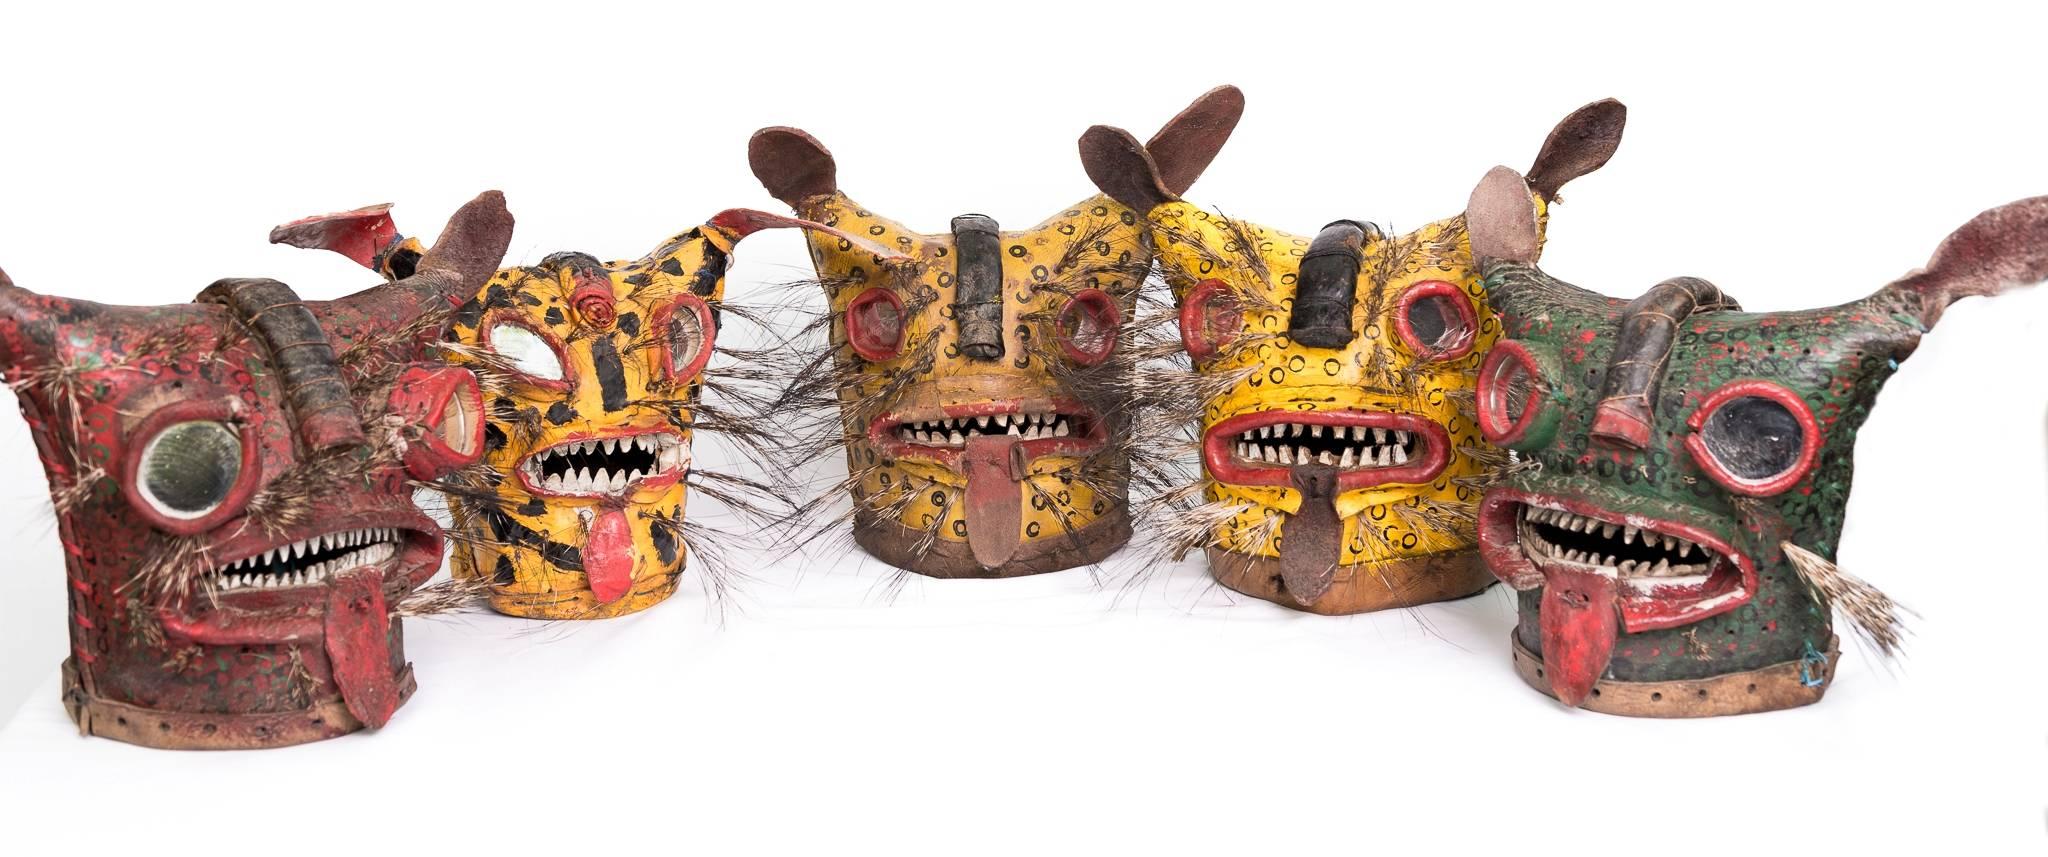 Leather Jaguar Ceremonial Masks from Zitlala Guerrero, Mexico For Sale 2